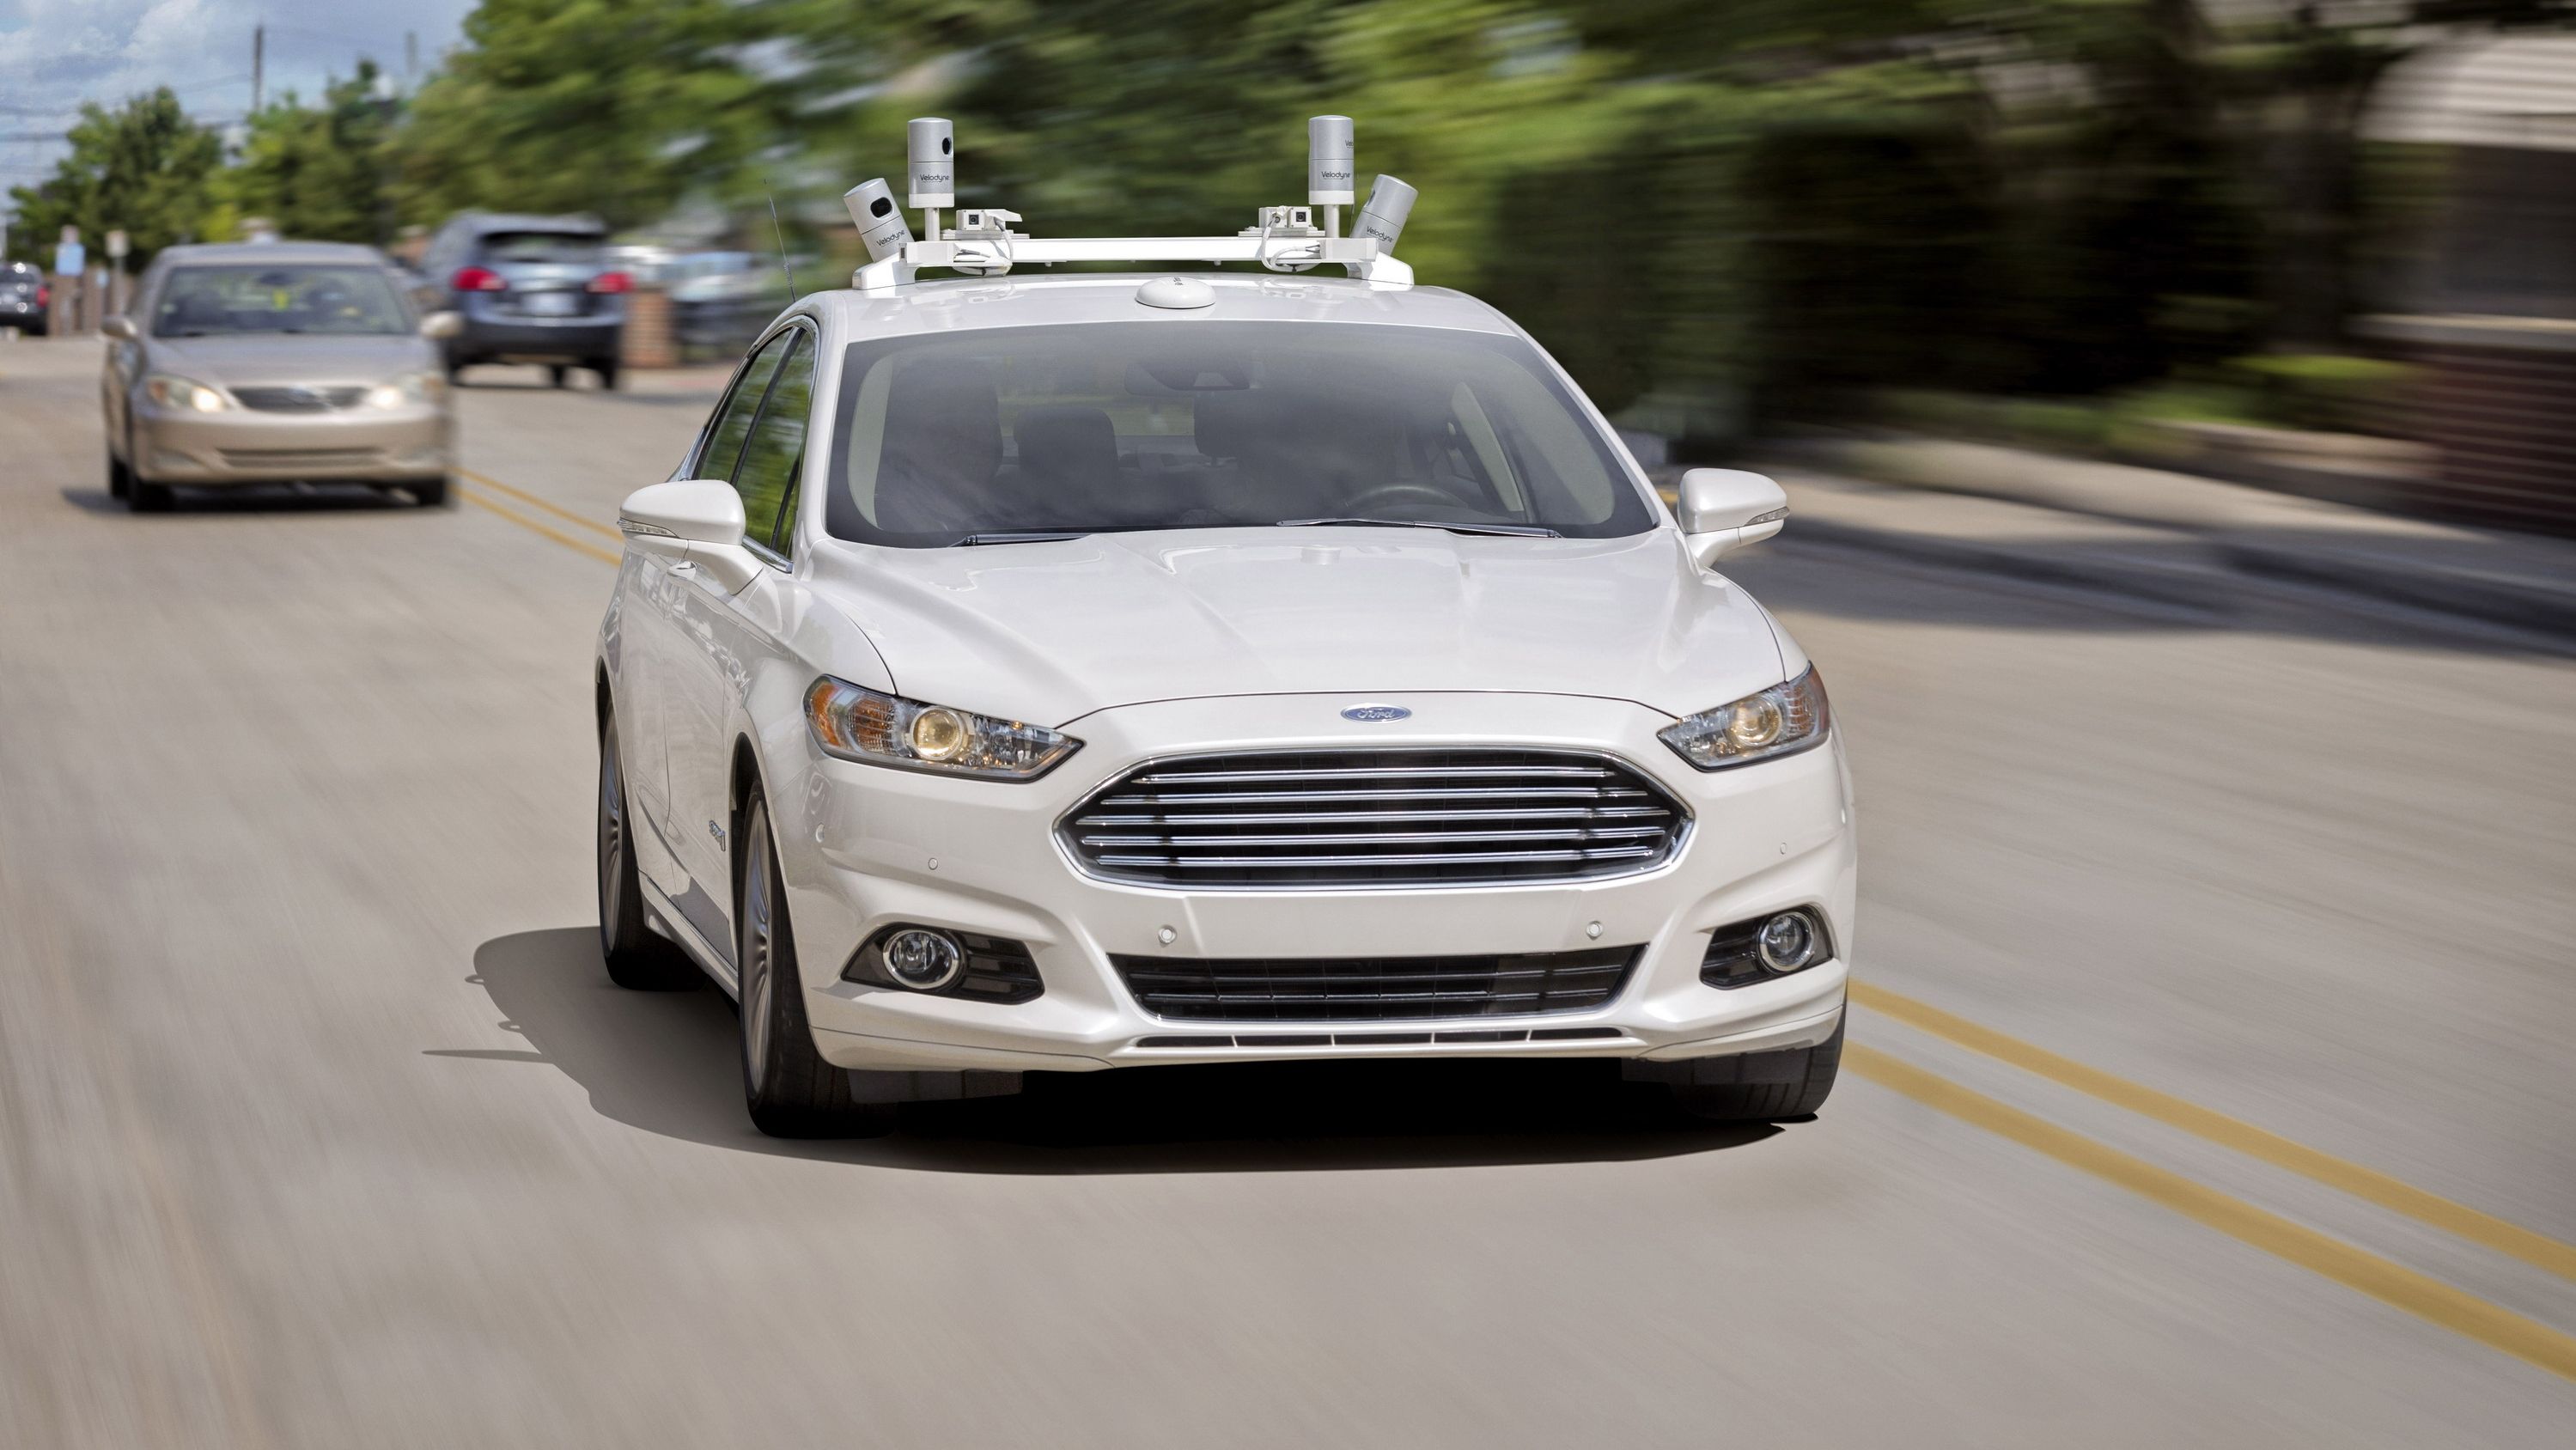 2017 Ford CEO Wants To Sell Driverless Cars By 2025